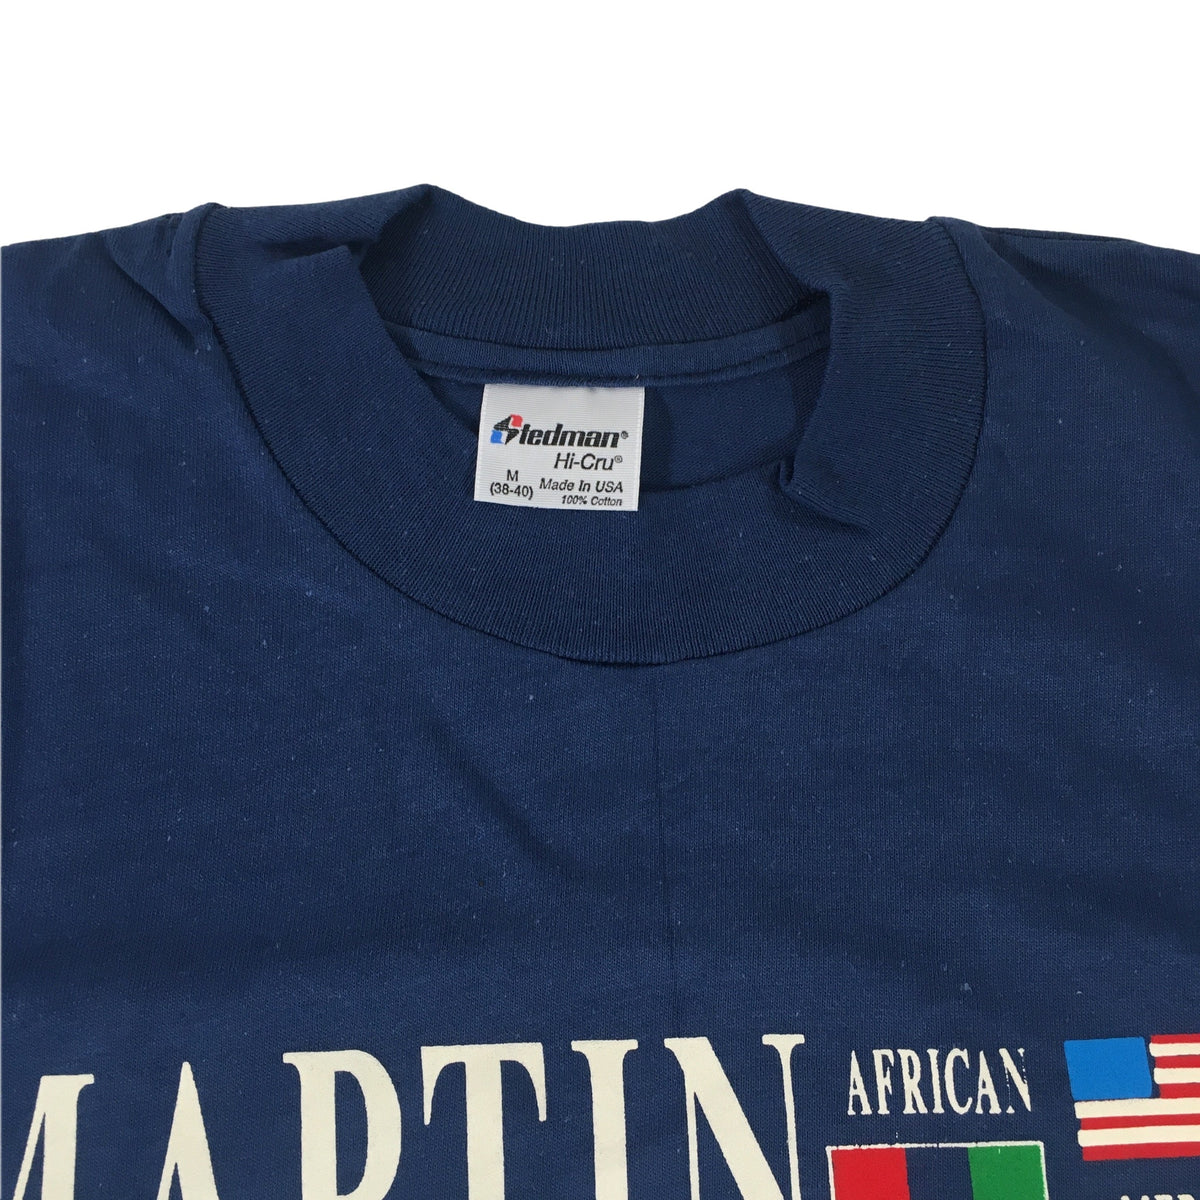 Vintage Martin Luther King &quot;I Have A Dream&quot; T-Shirt - jointcustodydc